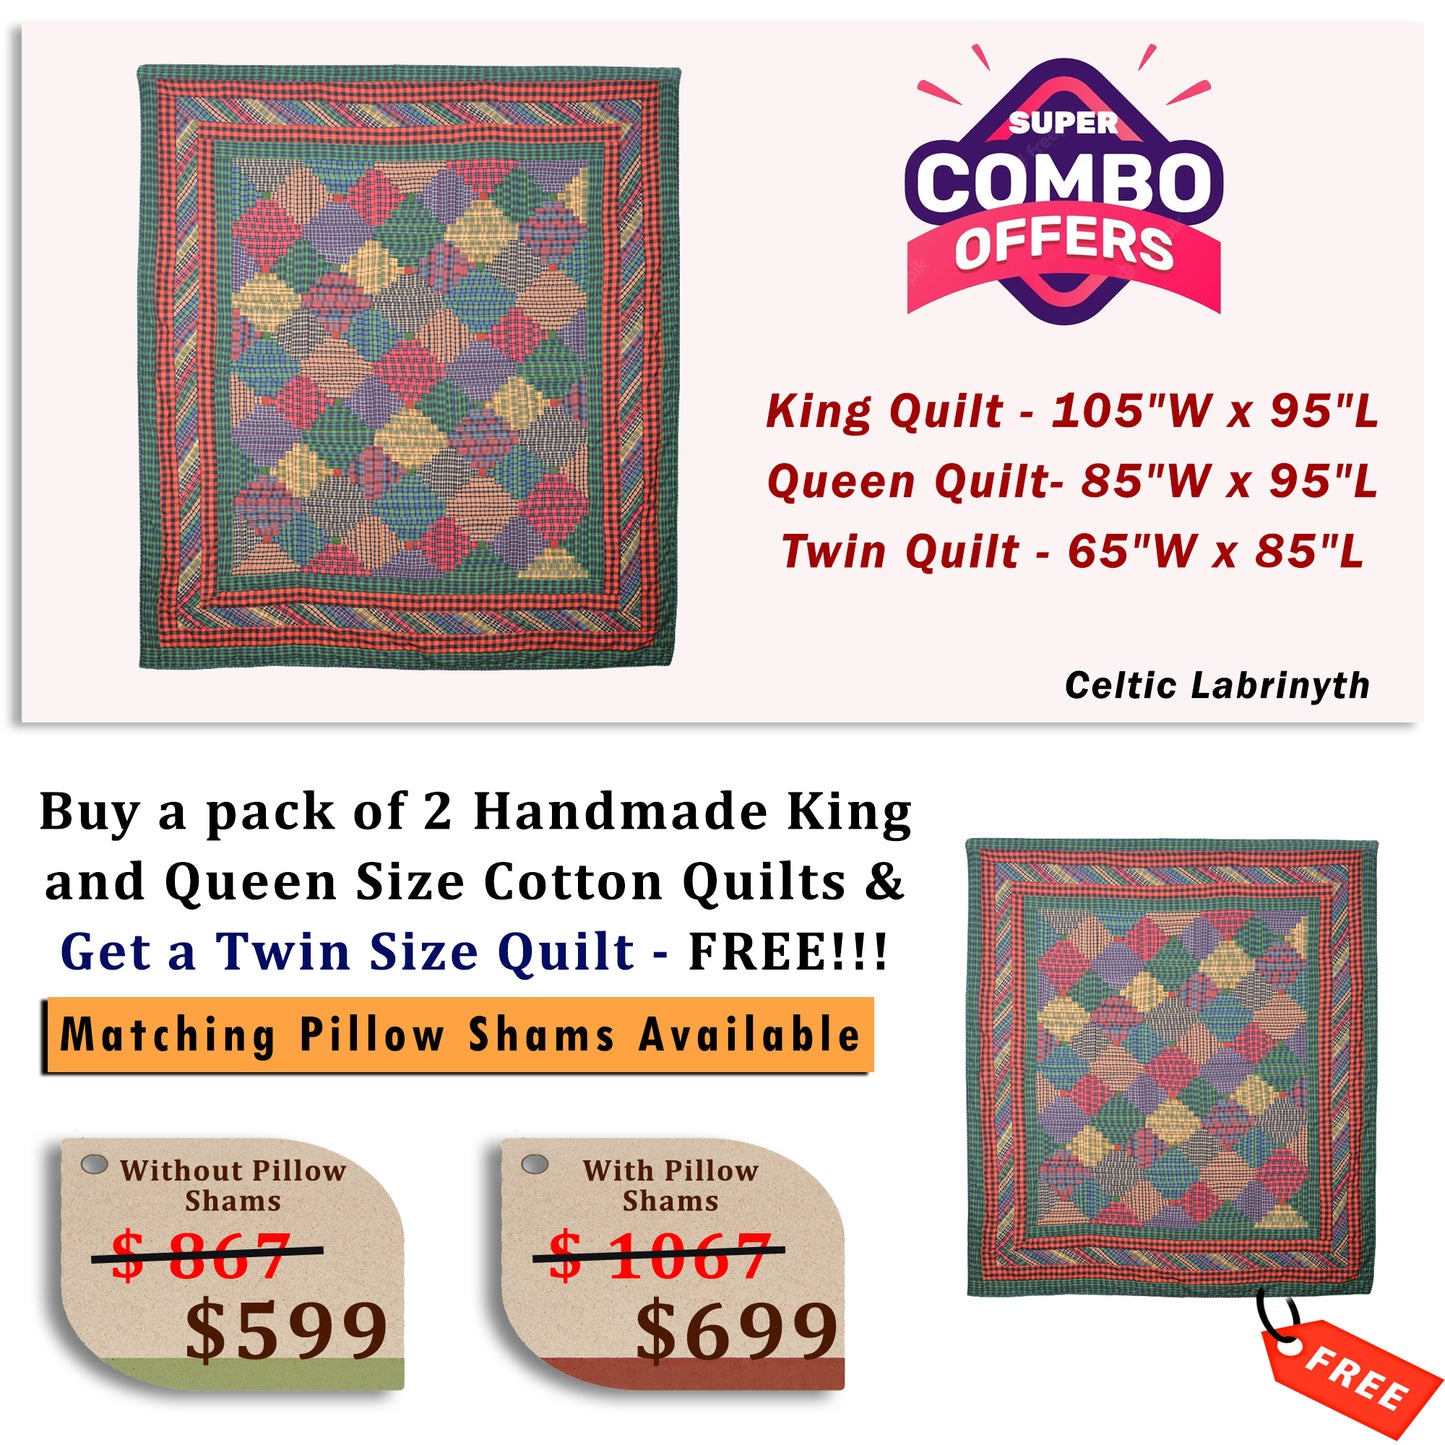 Celtic Labrinyth - Buy a pack of King and Queen Size Quilt, and get a Twin Size Quilt FREE!!!